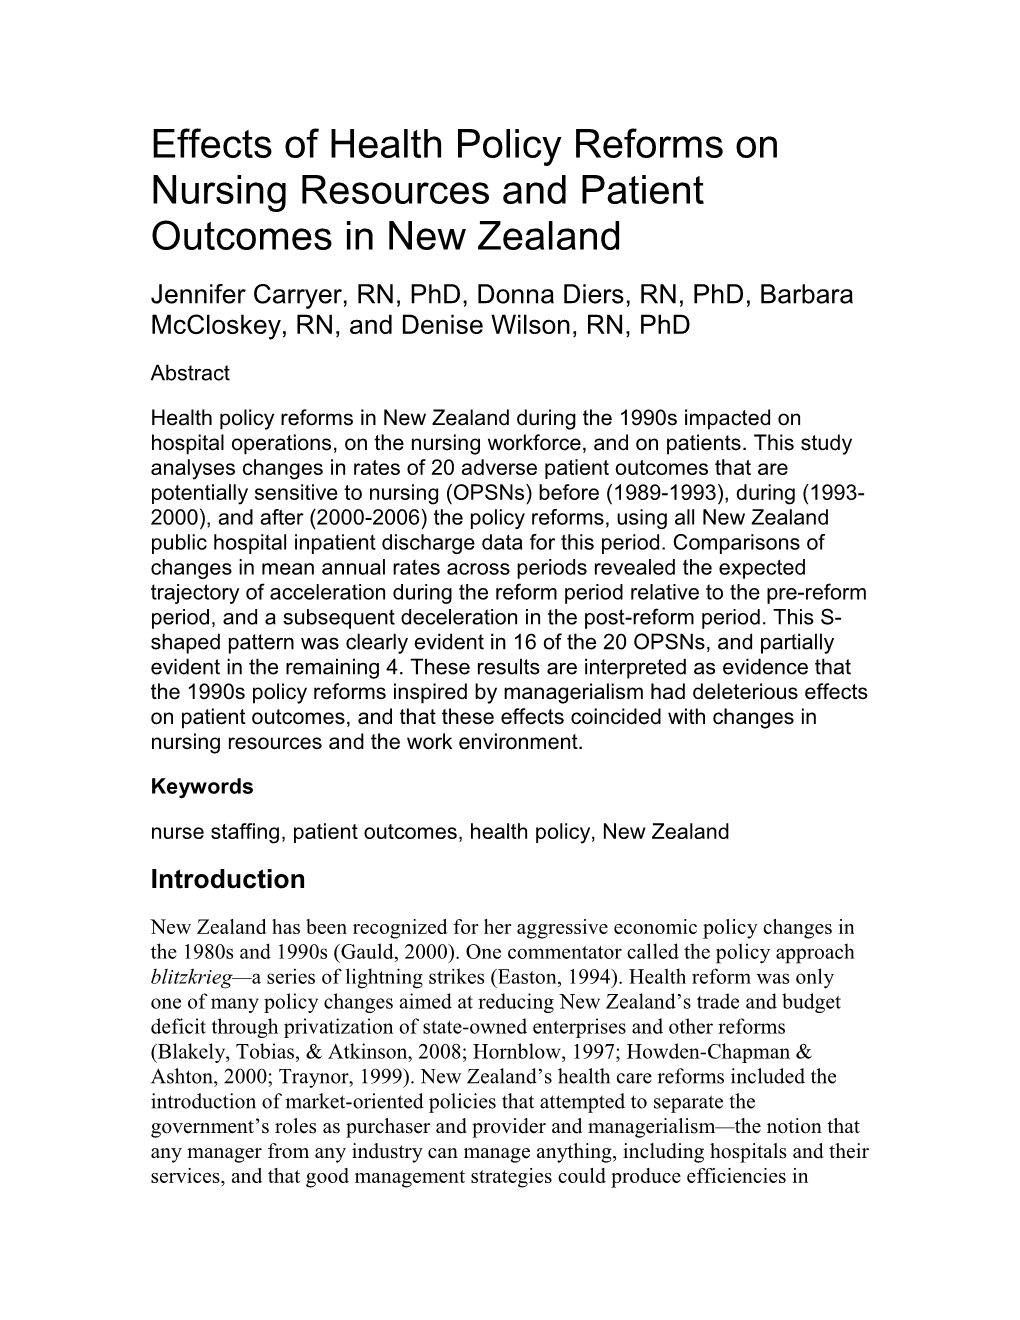 Effects of Health Policy Reforms on Nursing Resources and Patient